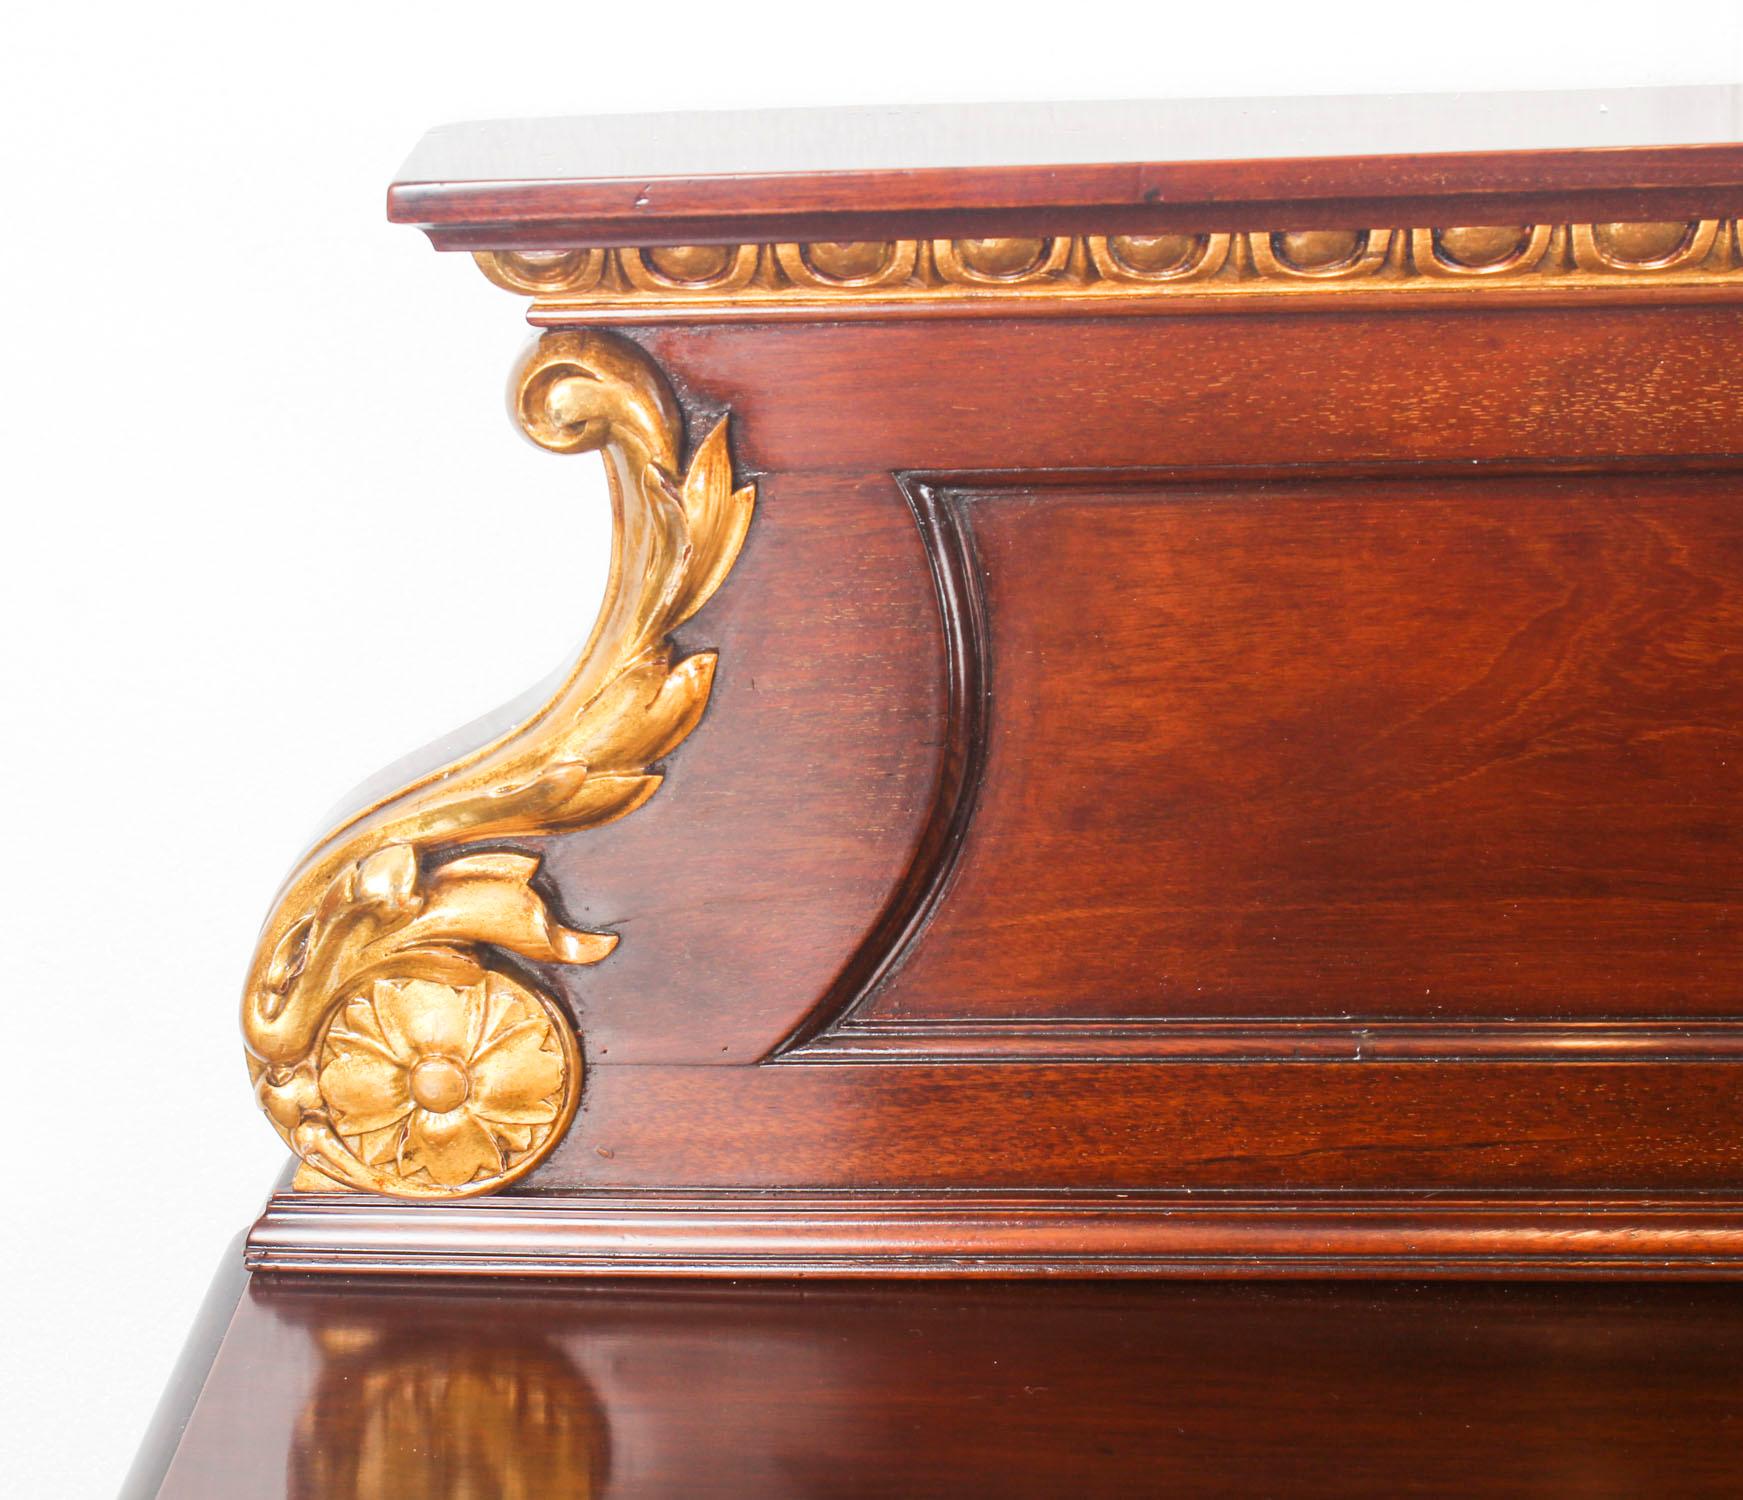 This is a fine monumental antique mahogany and parcel gilt serving table in the George II manner and dating from the mid-19th century.

The back is decorated with egg and dart moulding and acanthus scrolls. The central bow front drawer is flanked by